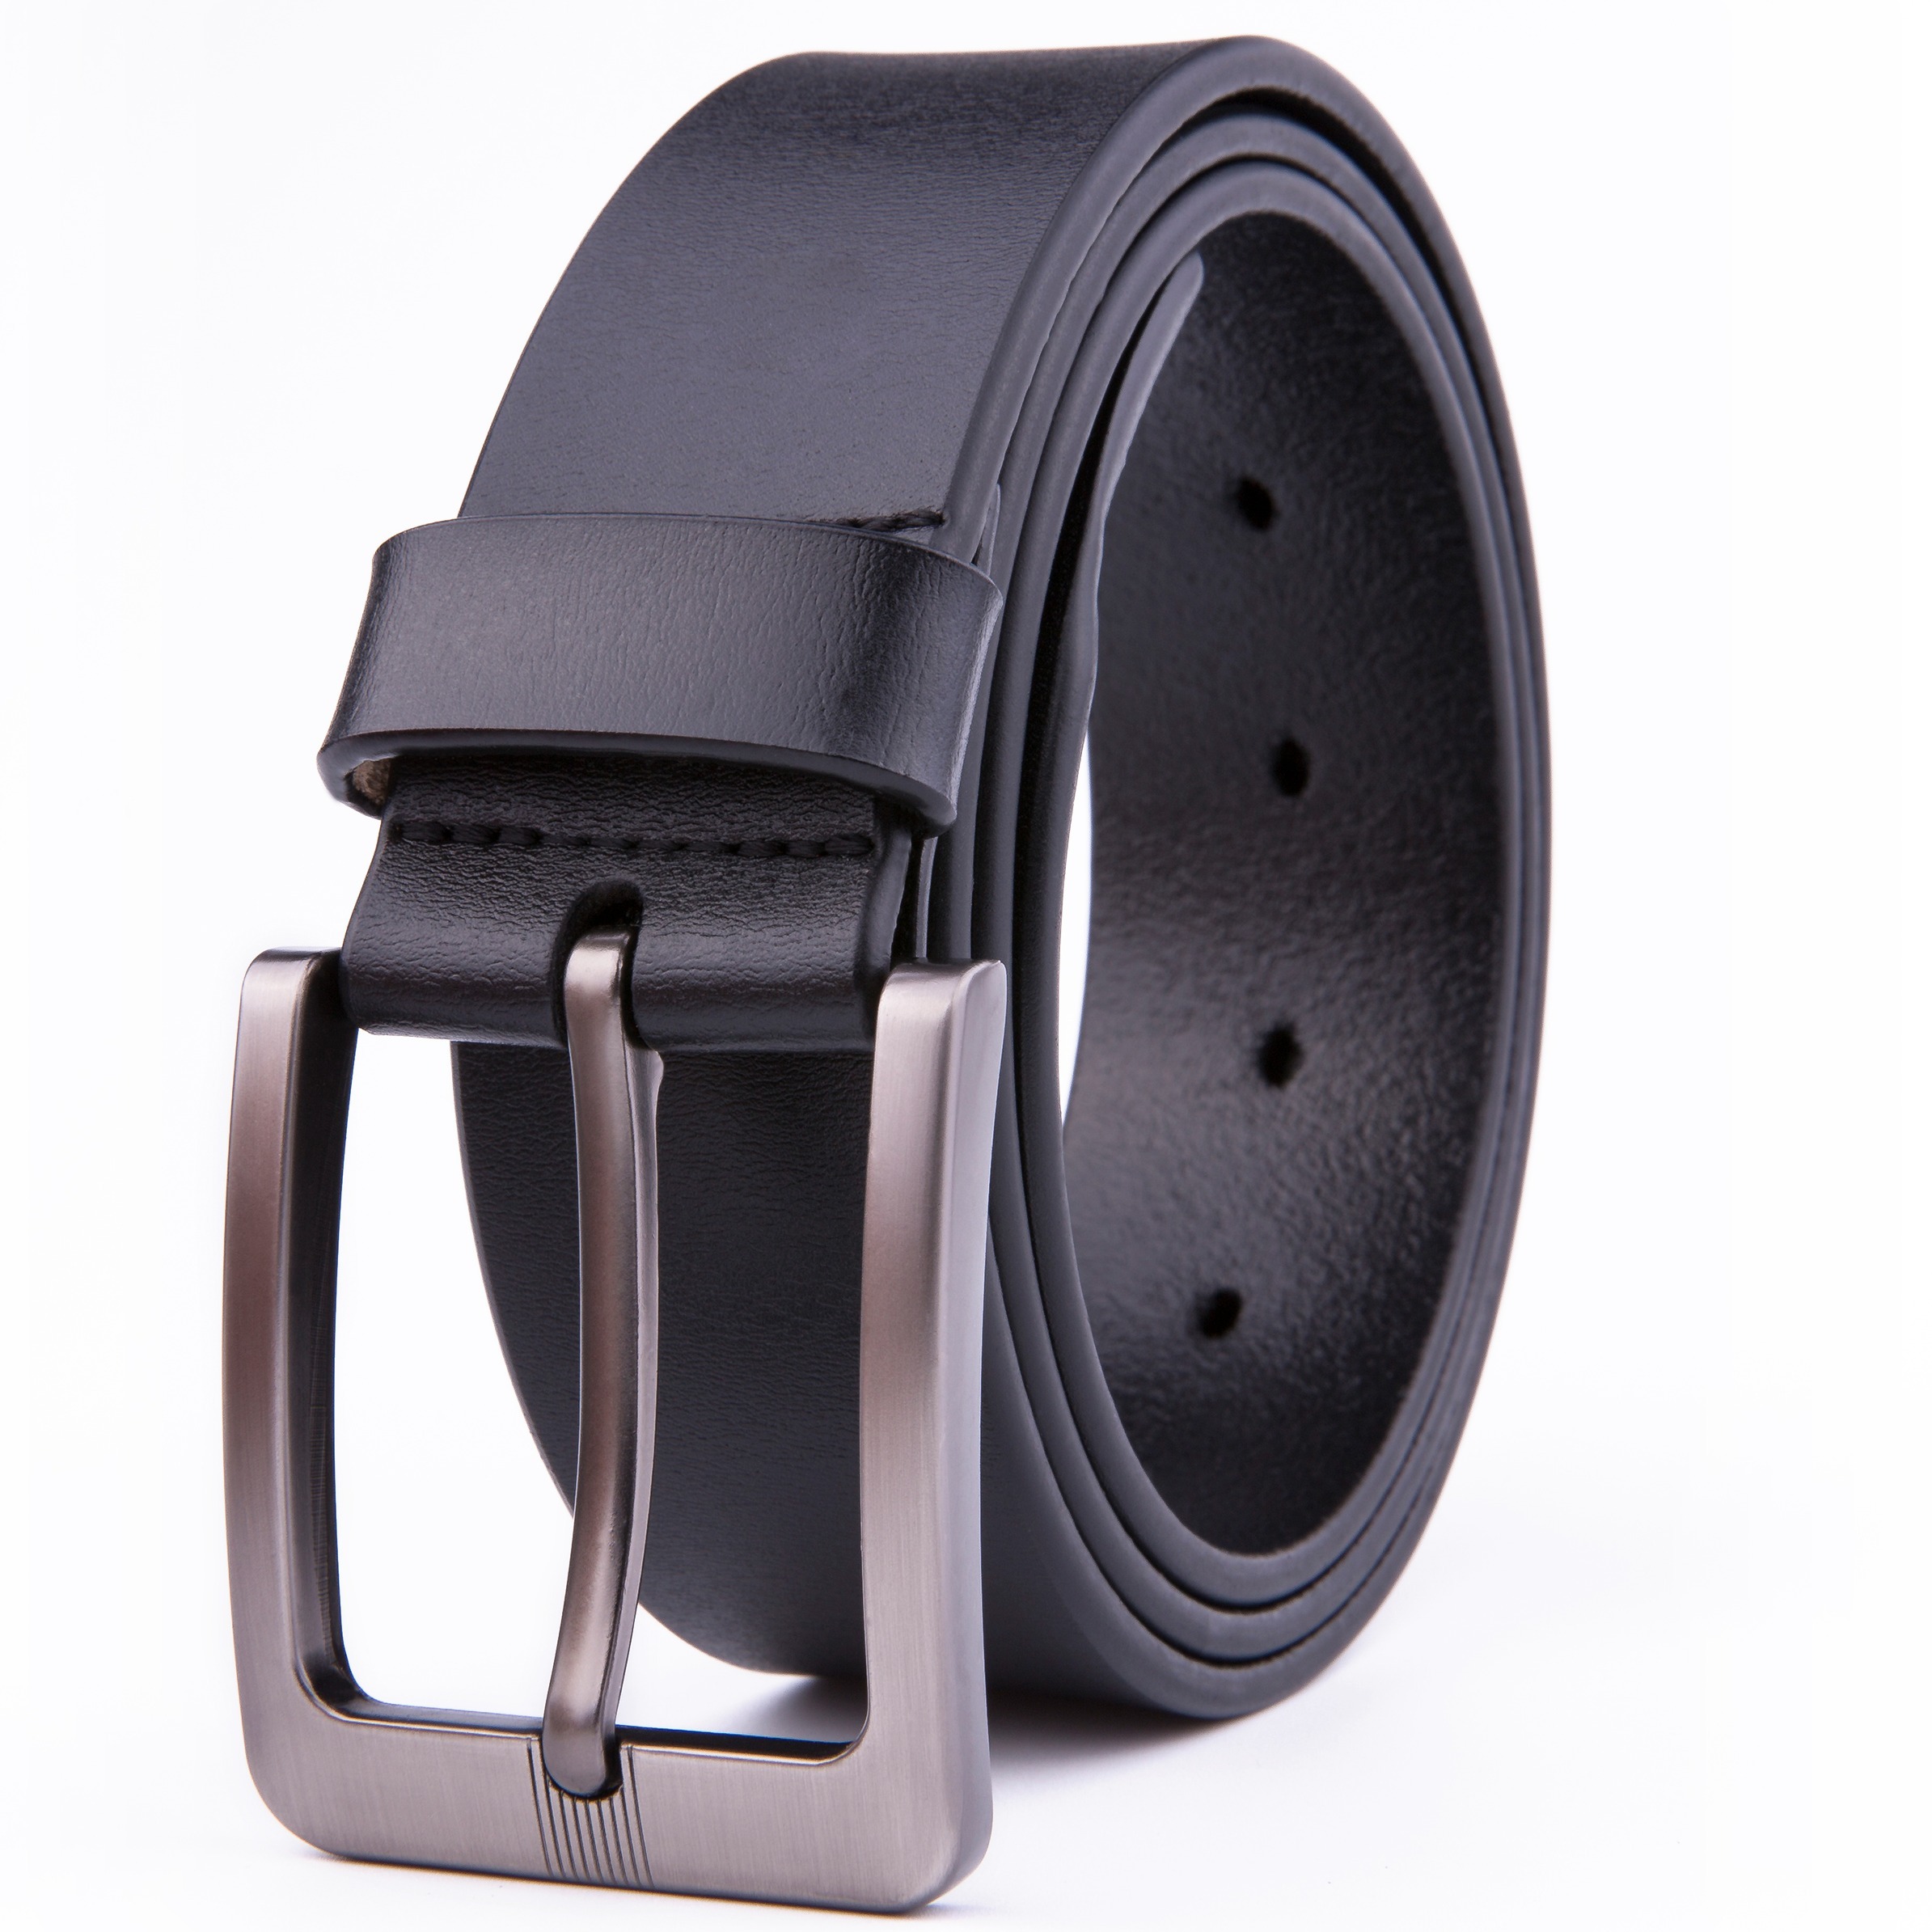 

Genuine Leather Dress Belt For Men - Mens Belts For Suits, Jeans, Uniform With Single Prong Buckle - Designed In The Usa